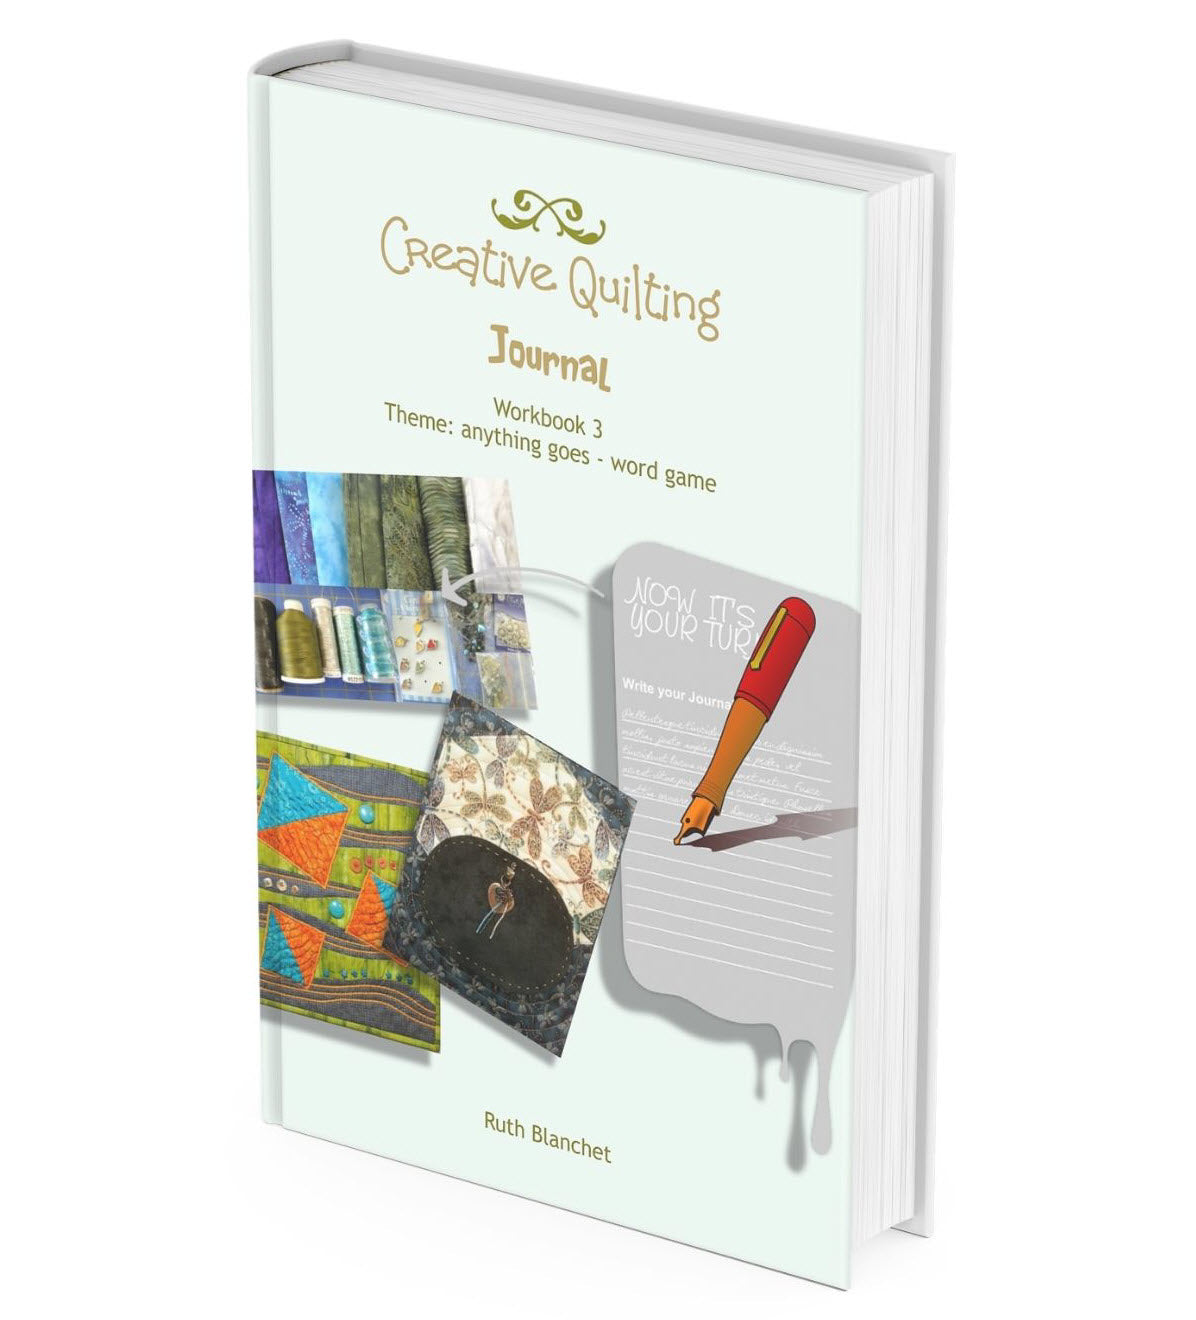 Creative awareness through journals is perfect for that leap from traditional quilter into art quilts or mixed media.